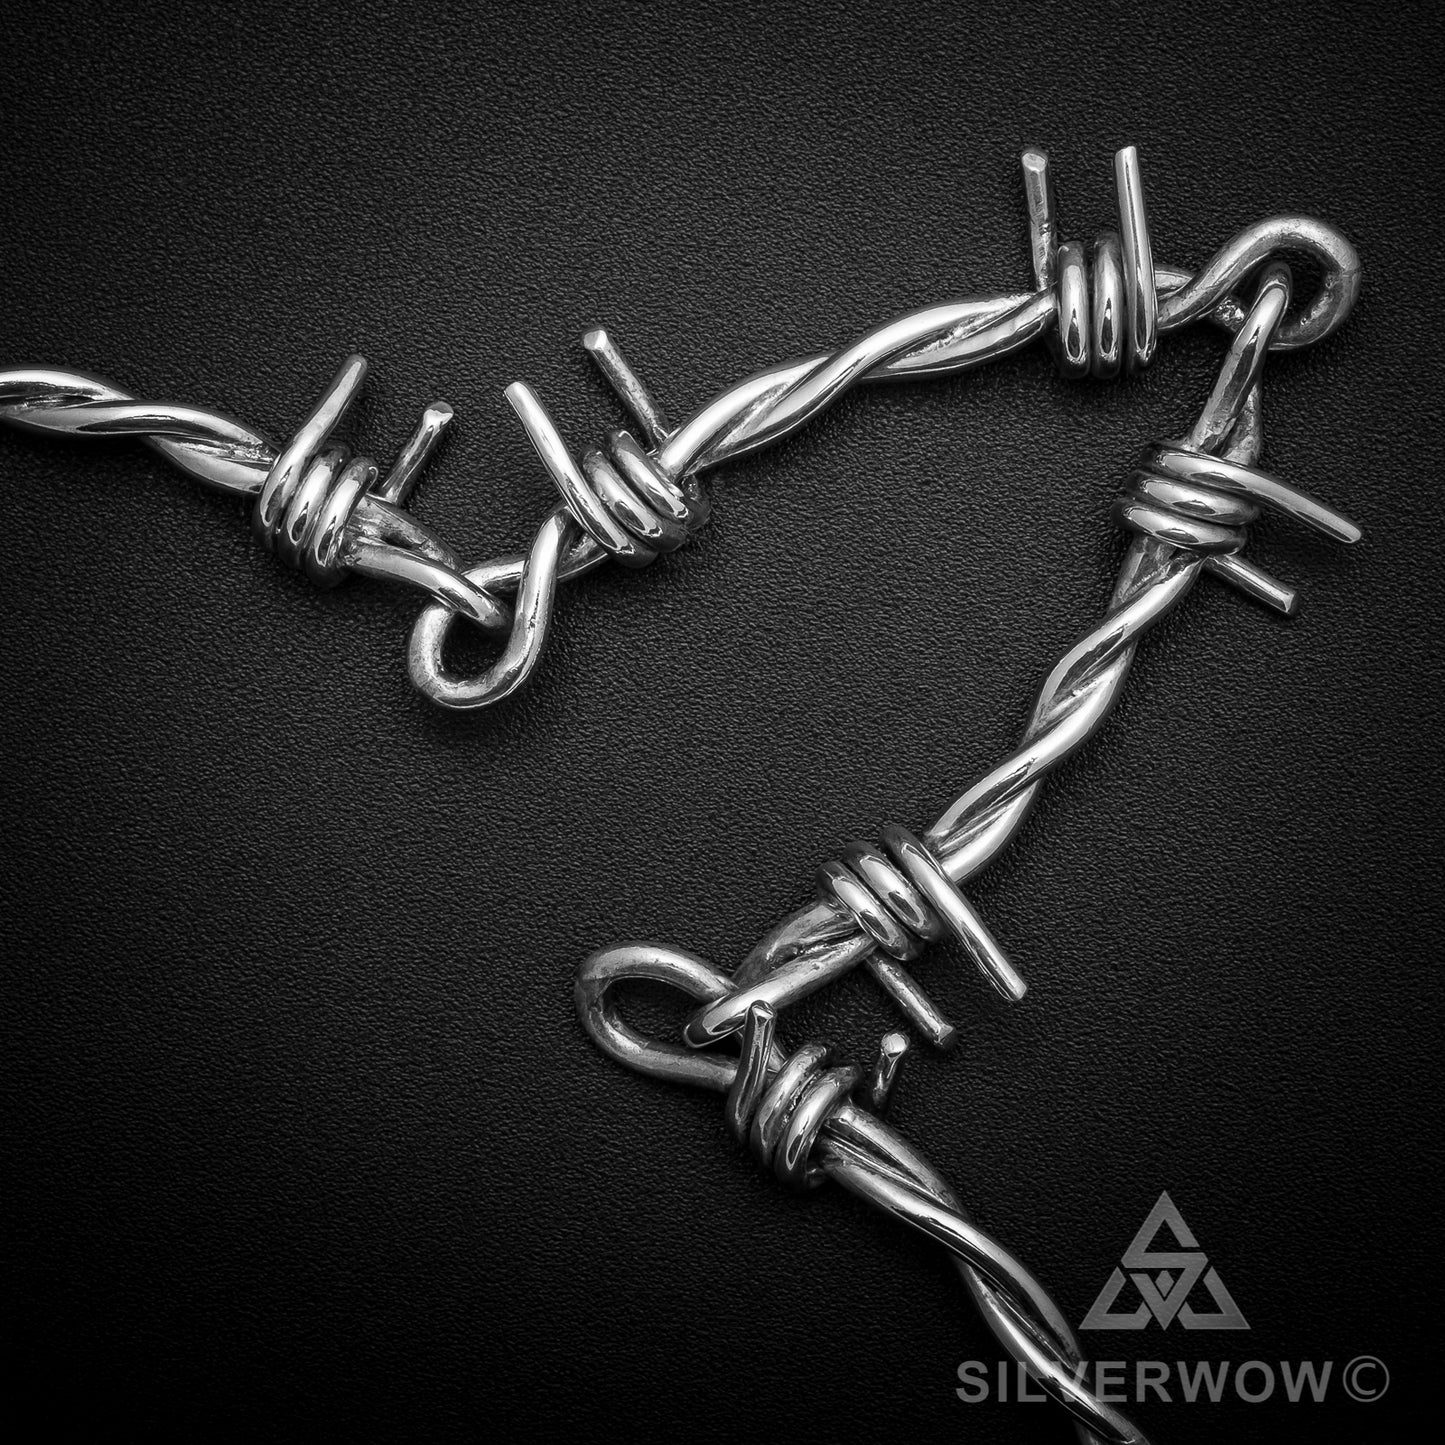 PL23 - Barbed Wire Necklace Chain ( new lock version )